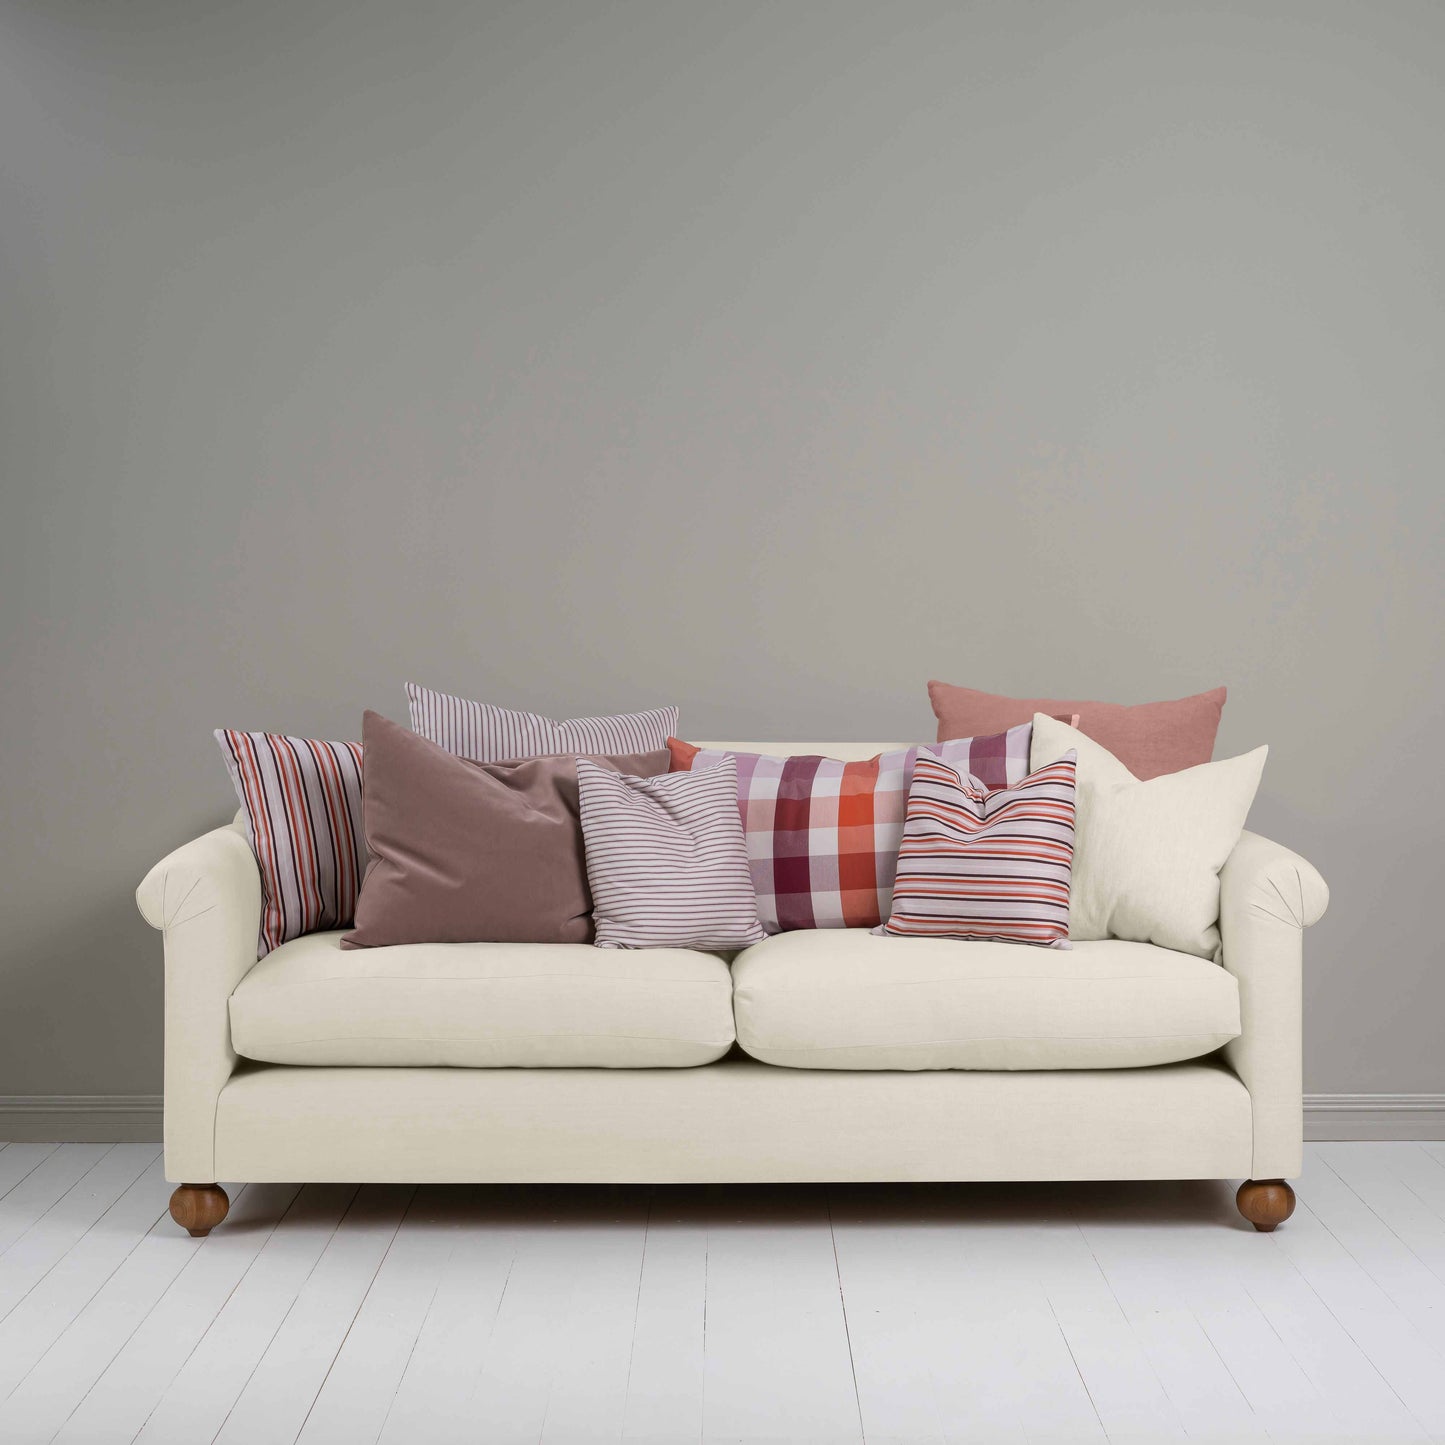 Dolittle 4 seater sofa in Laidback Linen Dove